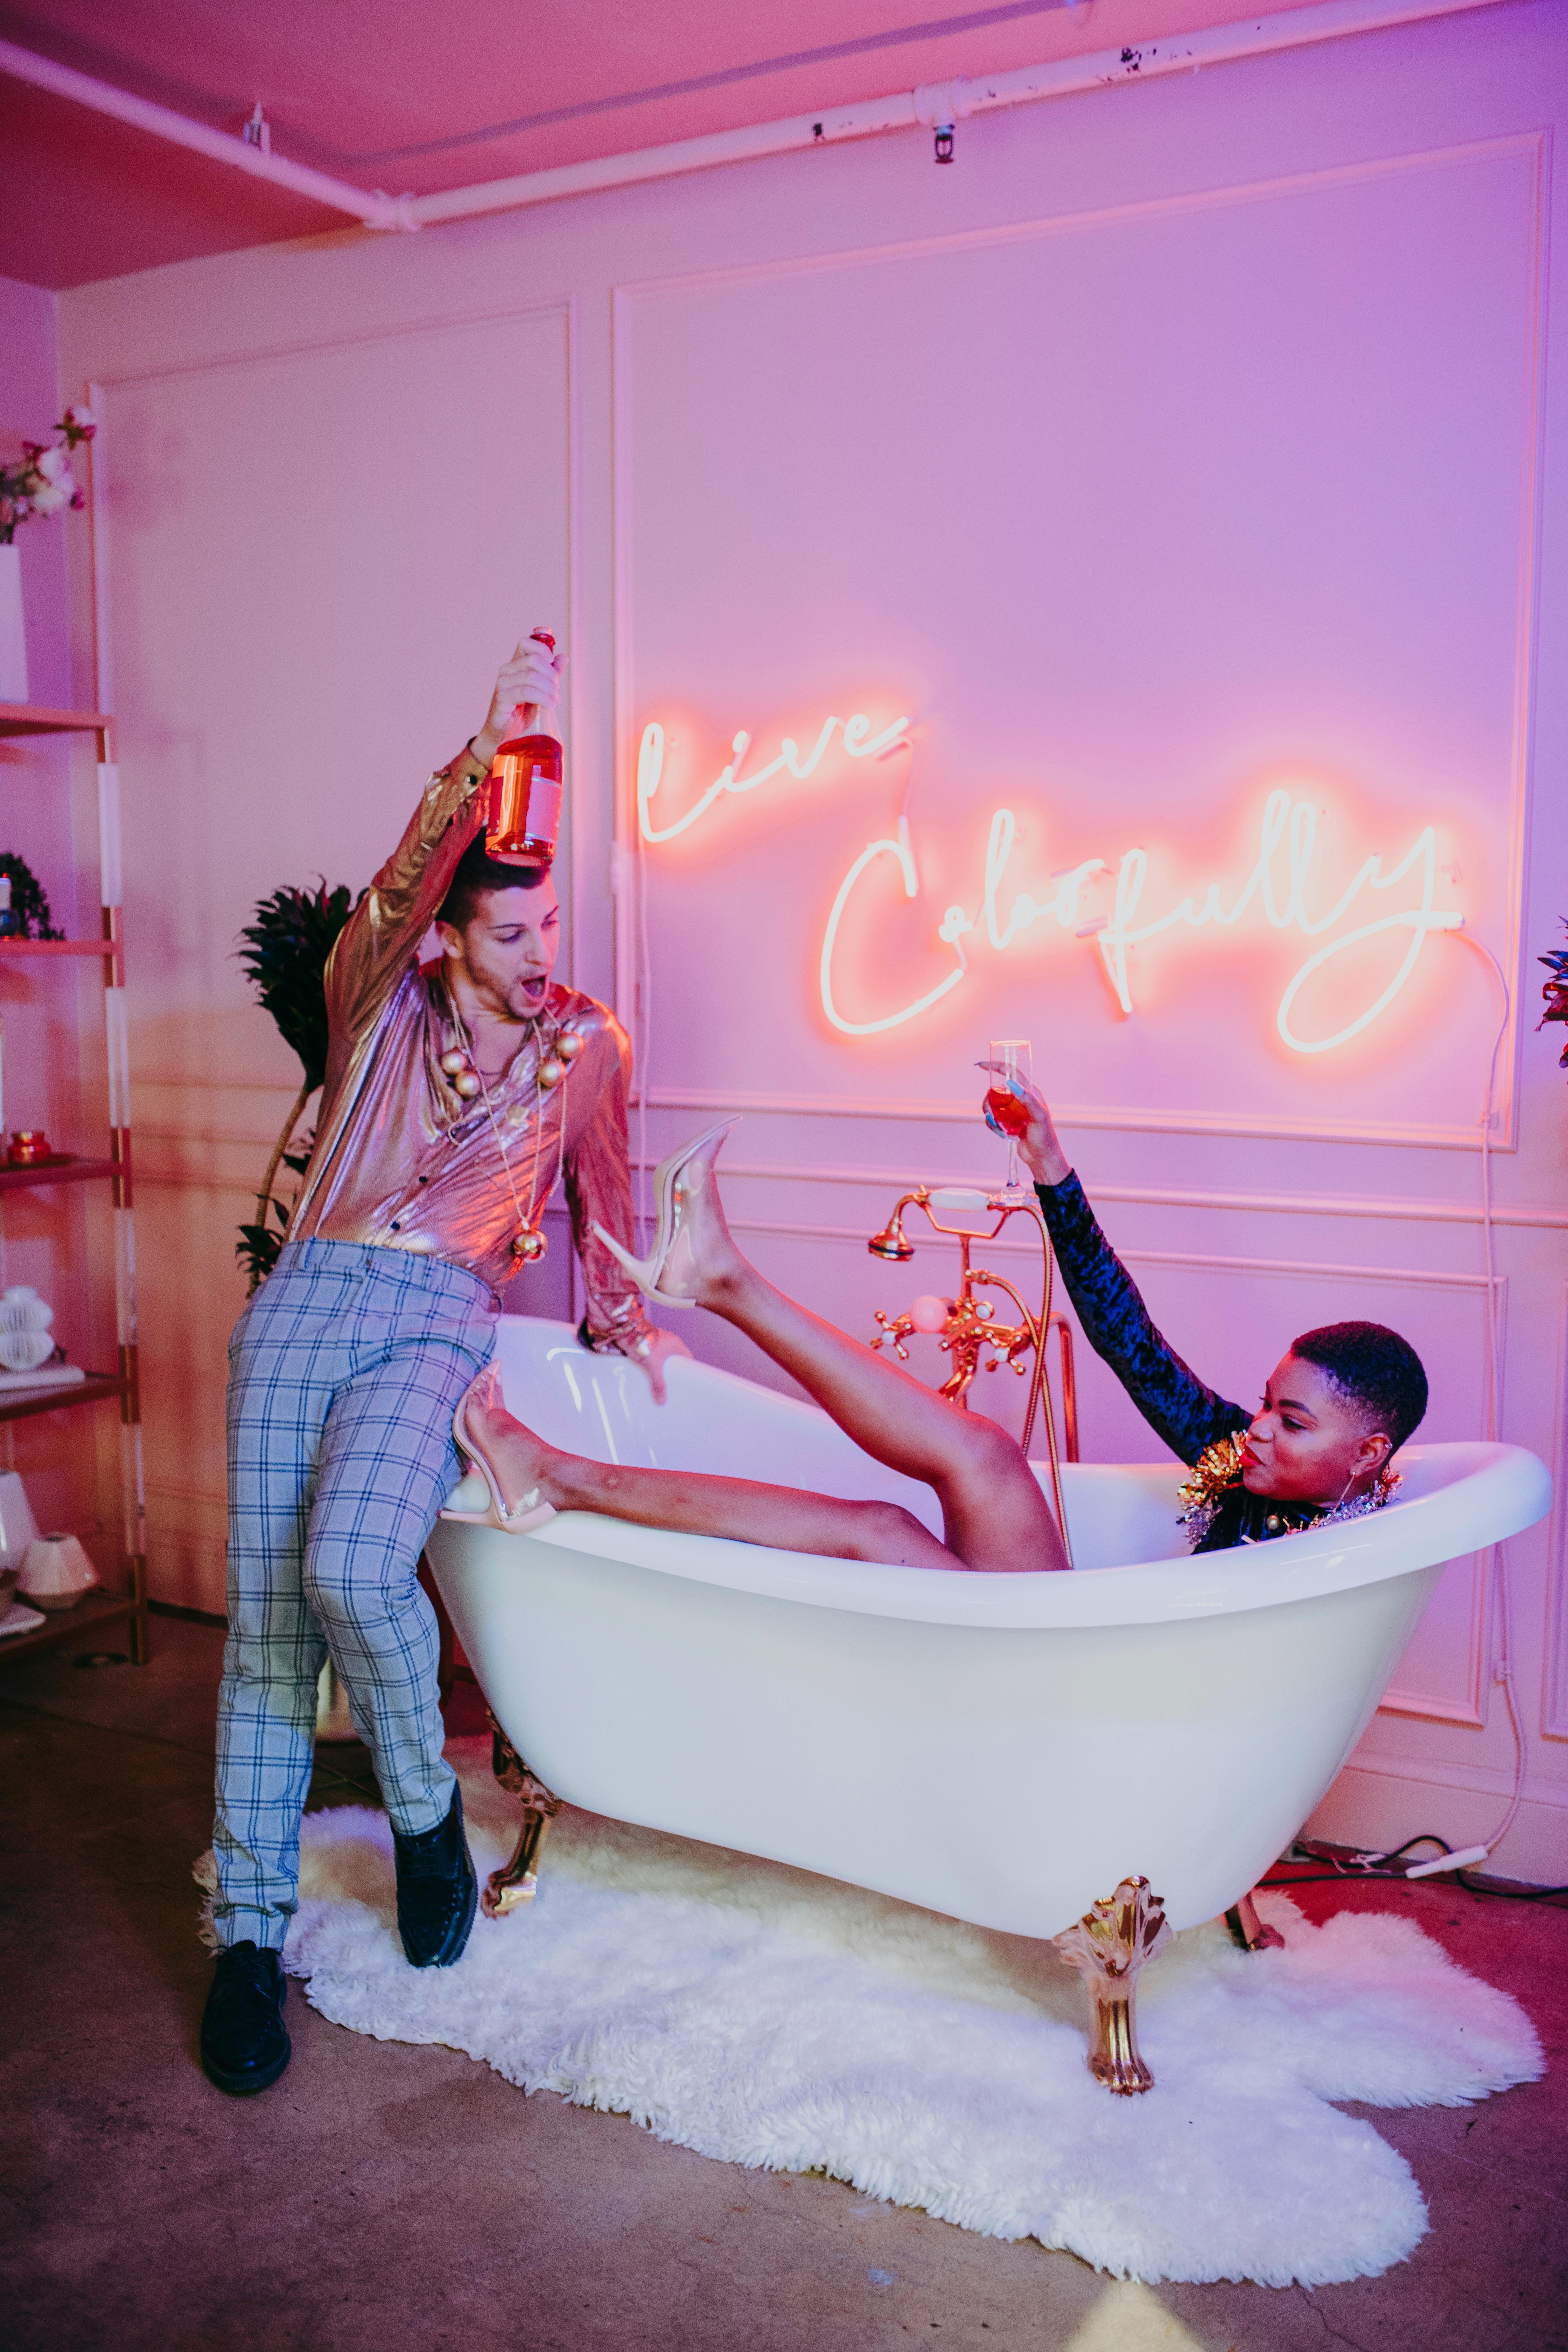 two stylish people hanging out on a bathtub